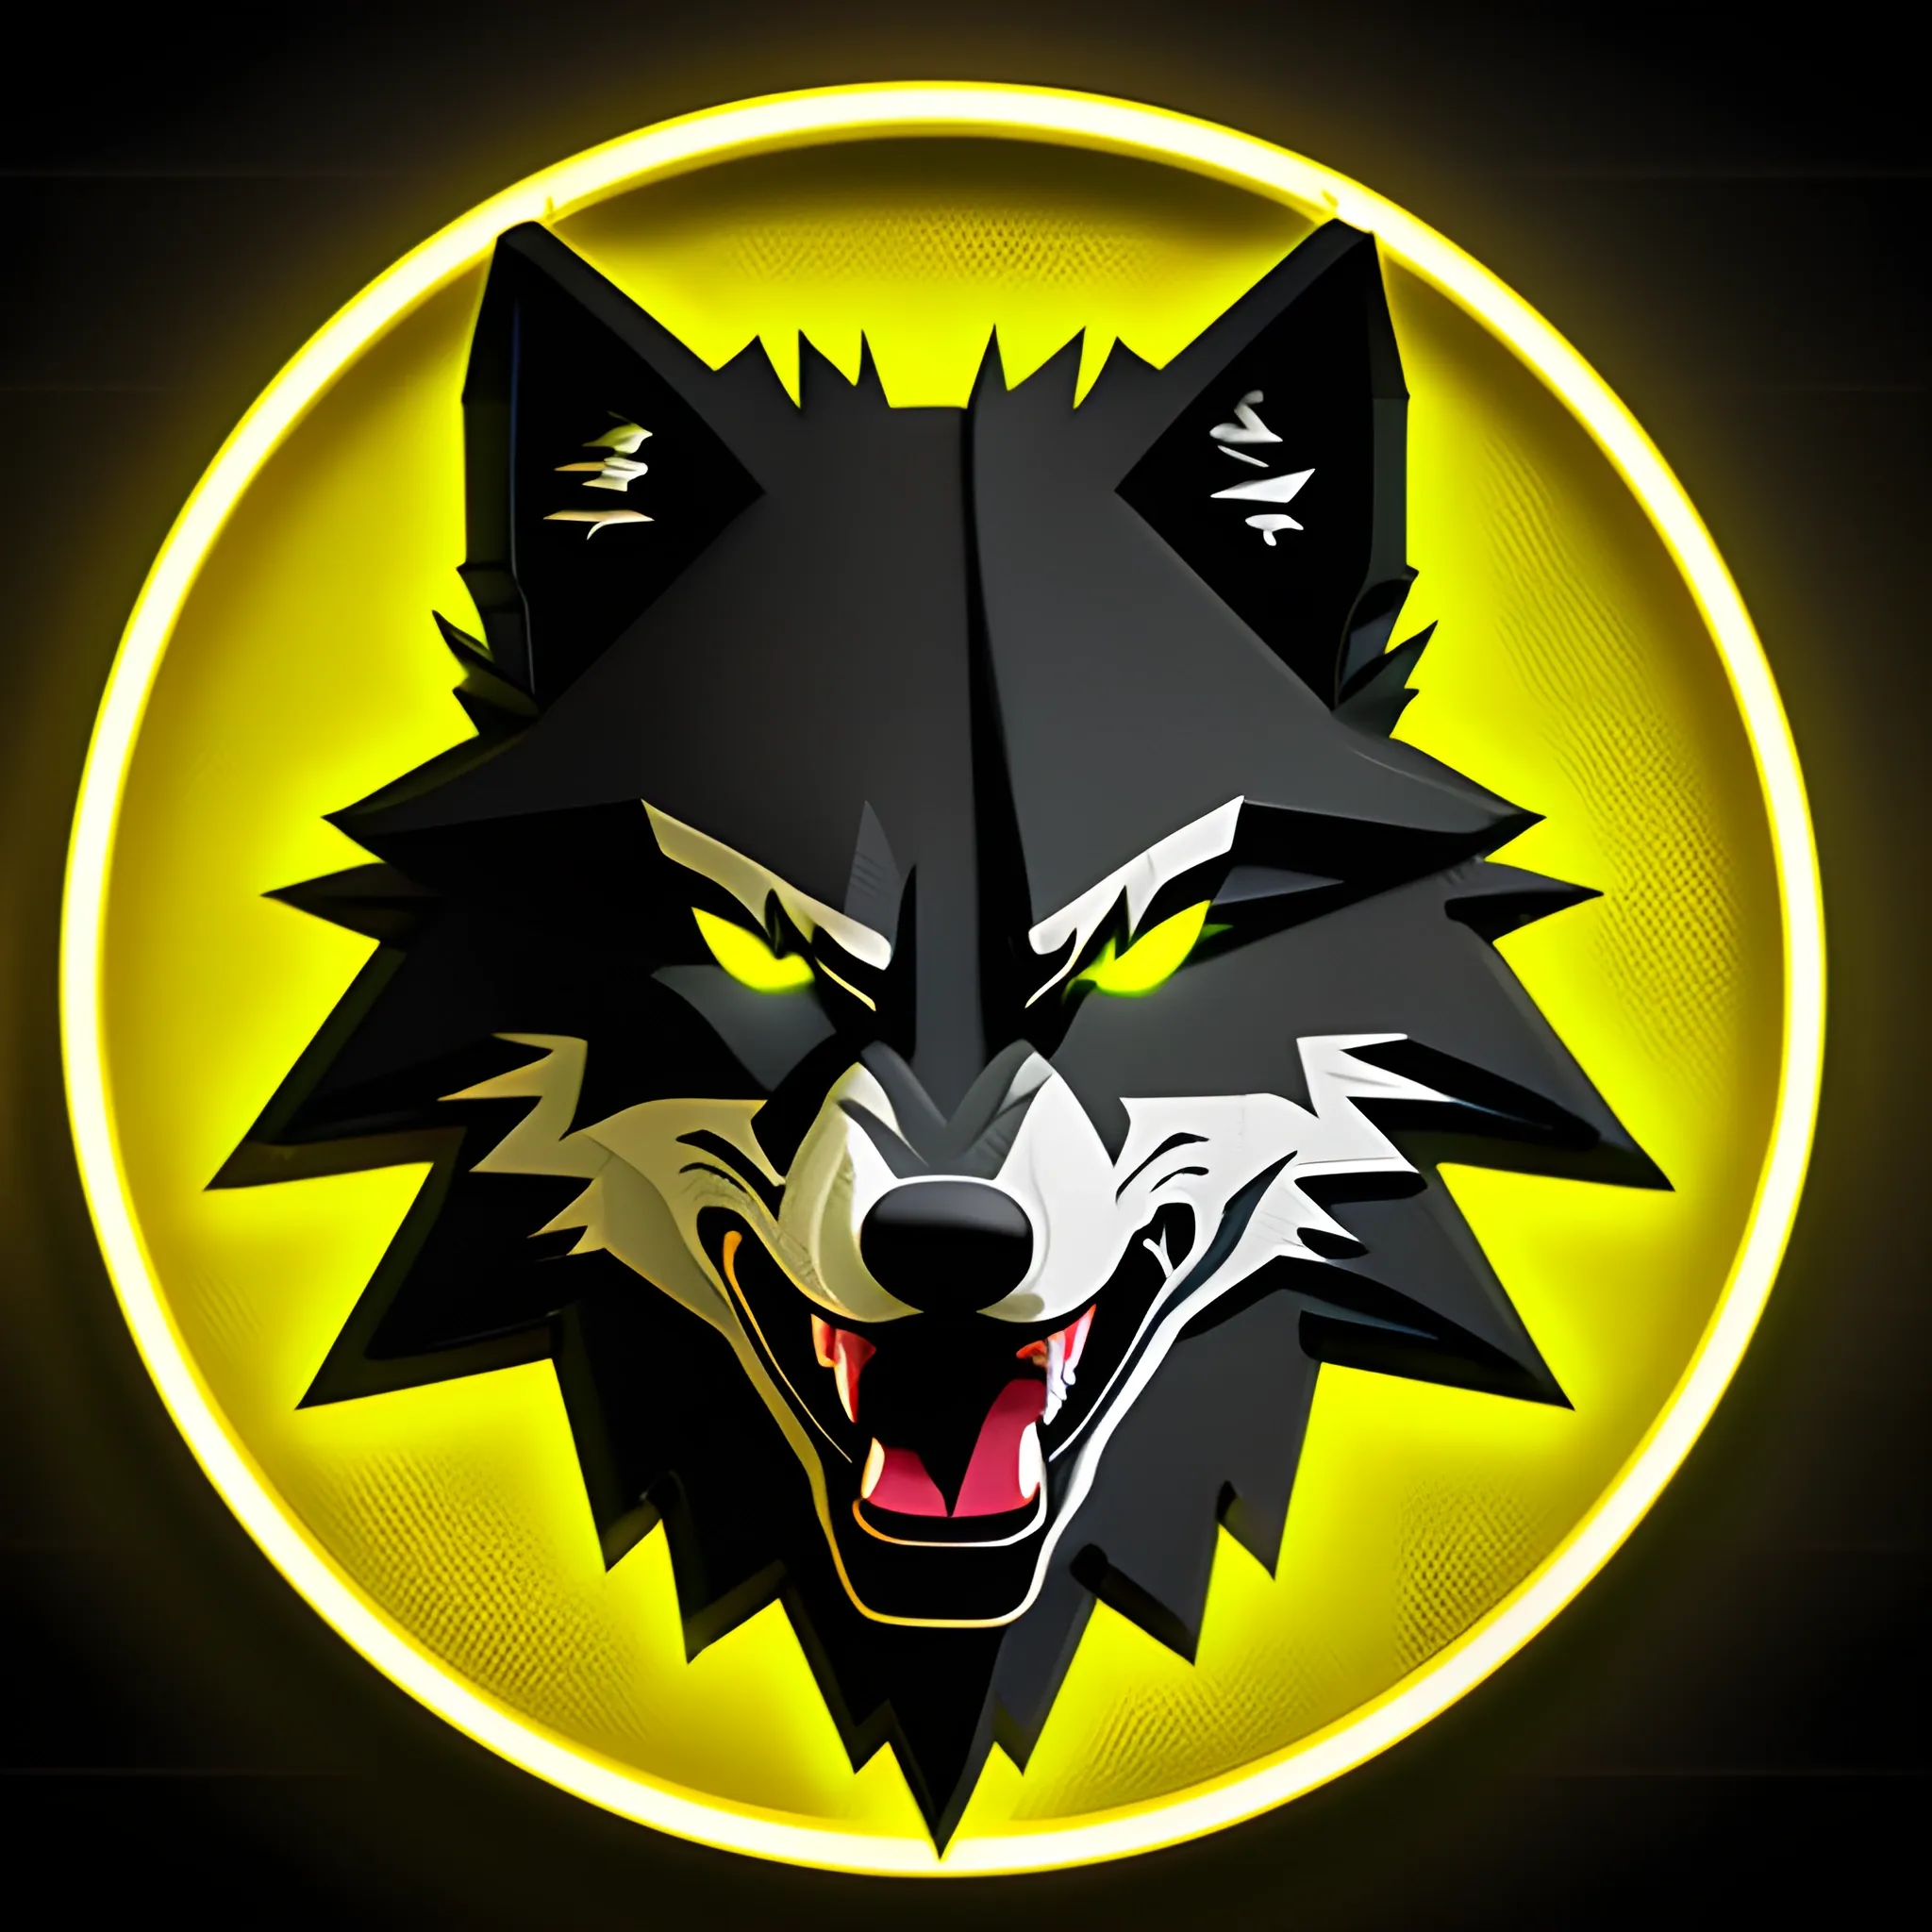 An angry hacker wolf logo with the letter "A" at the background, using the yellow neon color, 3D